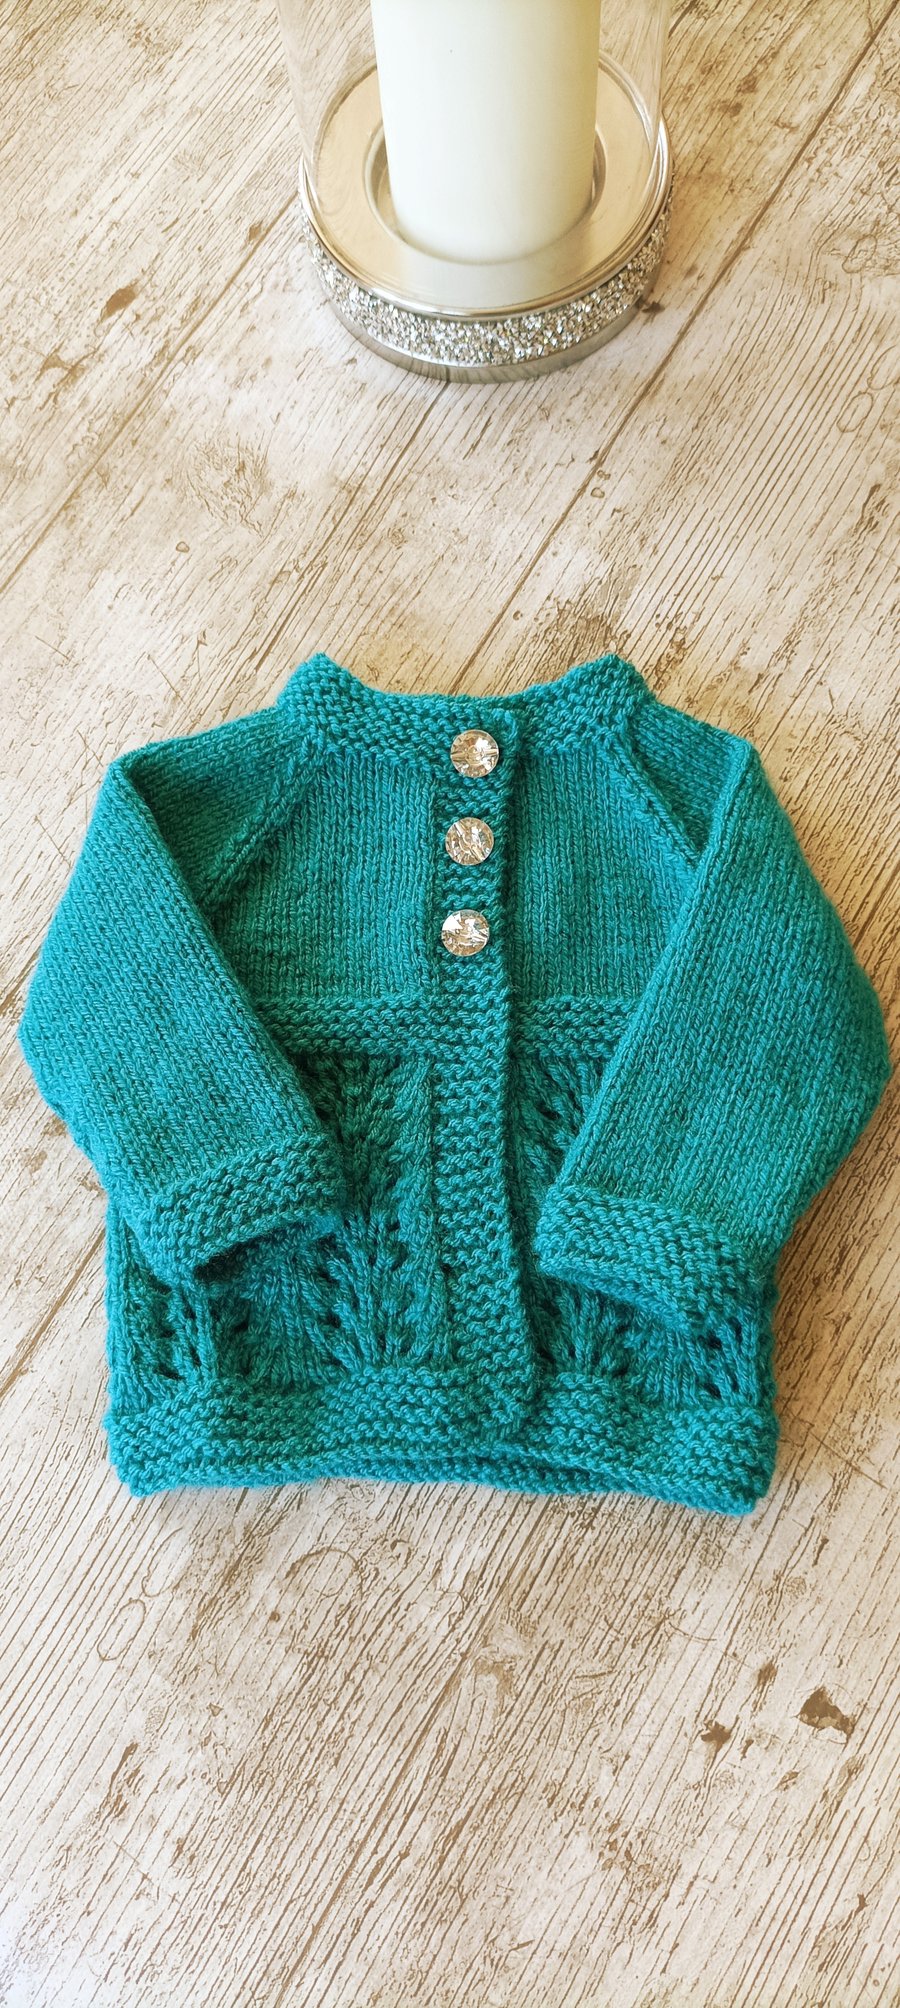 Baby cardigan 0-3 months, teal, choice of buttons